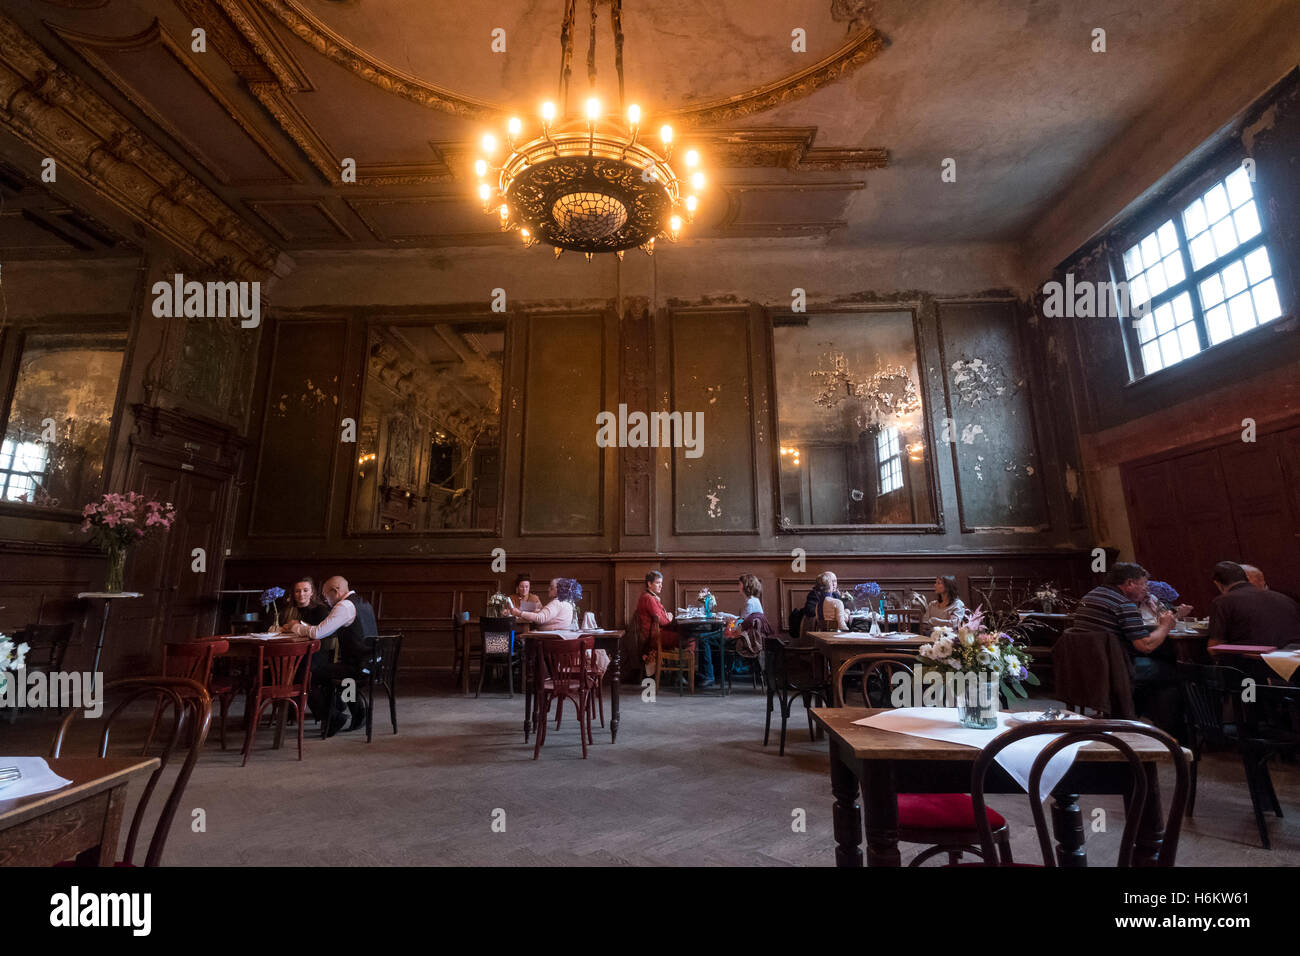 Interior of historic Clarchens ballroom cafe in Mitte Berlin Germany Stock Photo